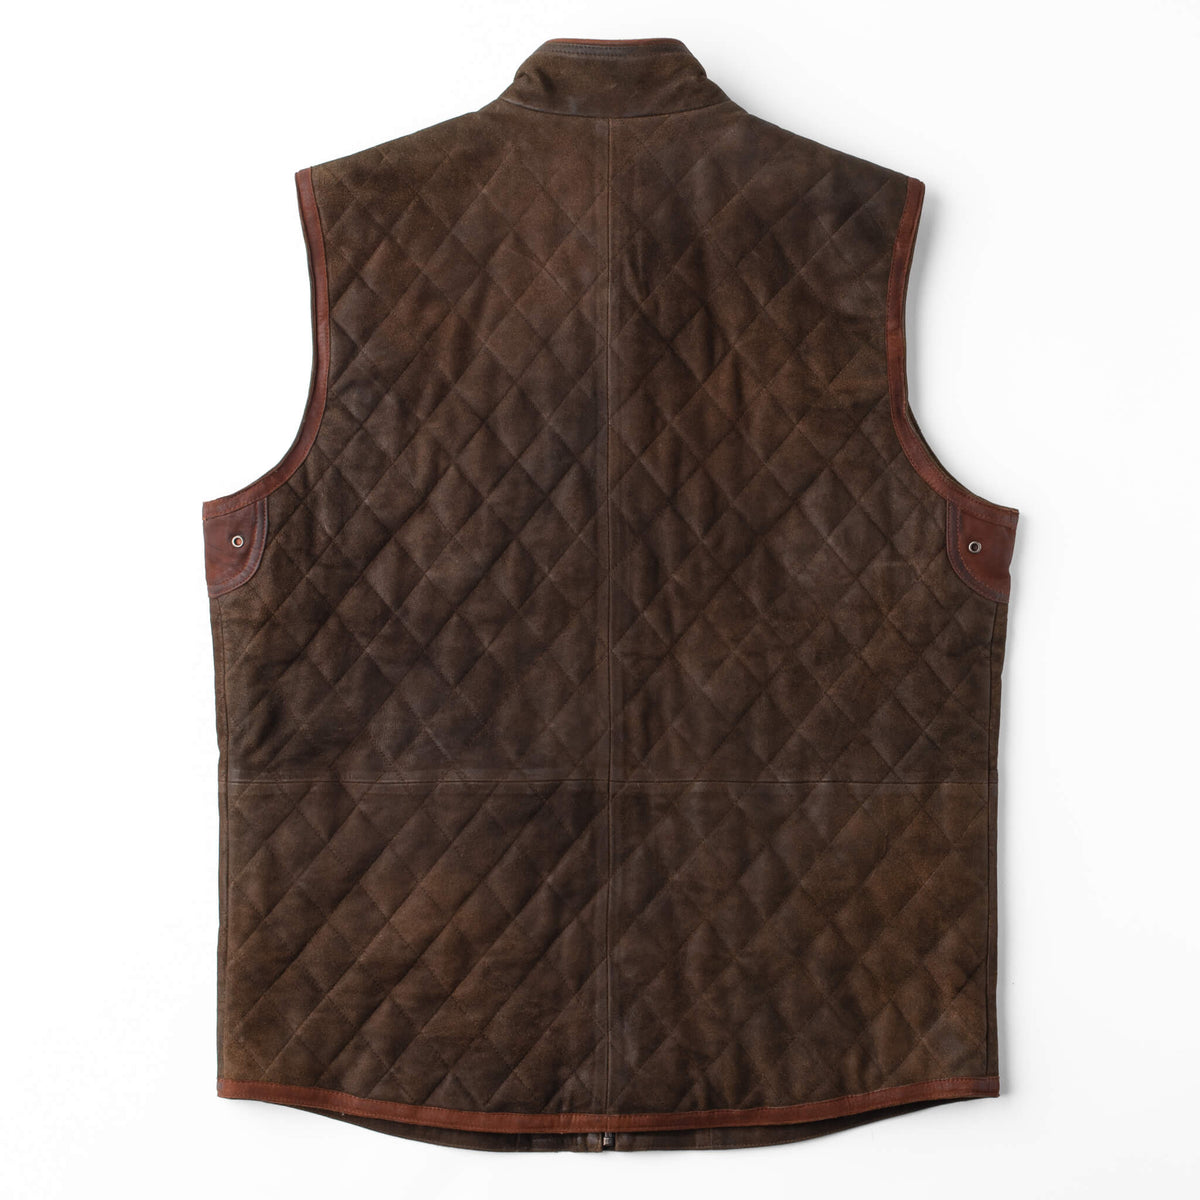 Shooter Goat Suede Leather Vest